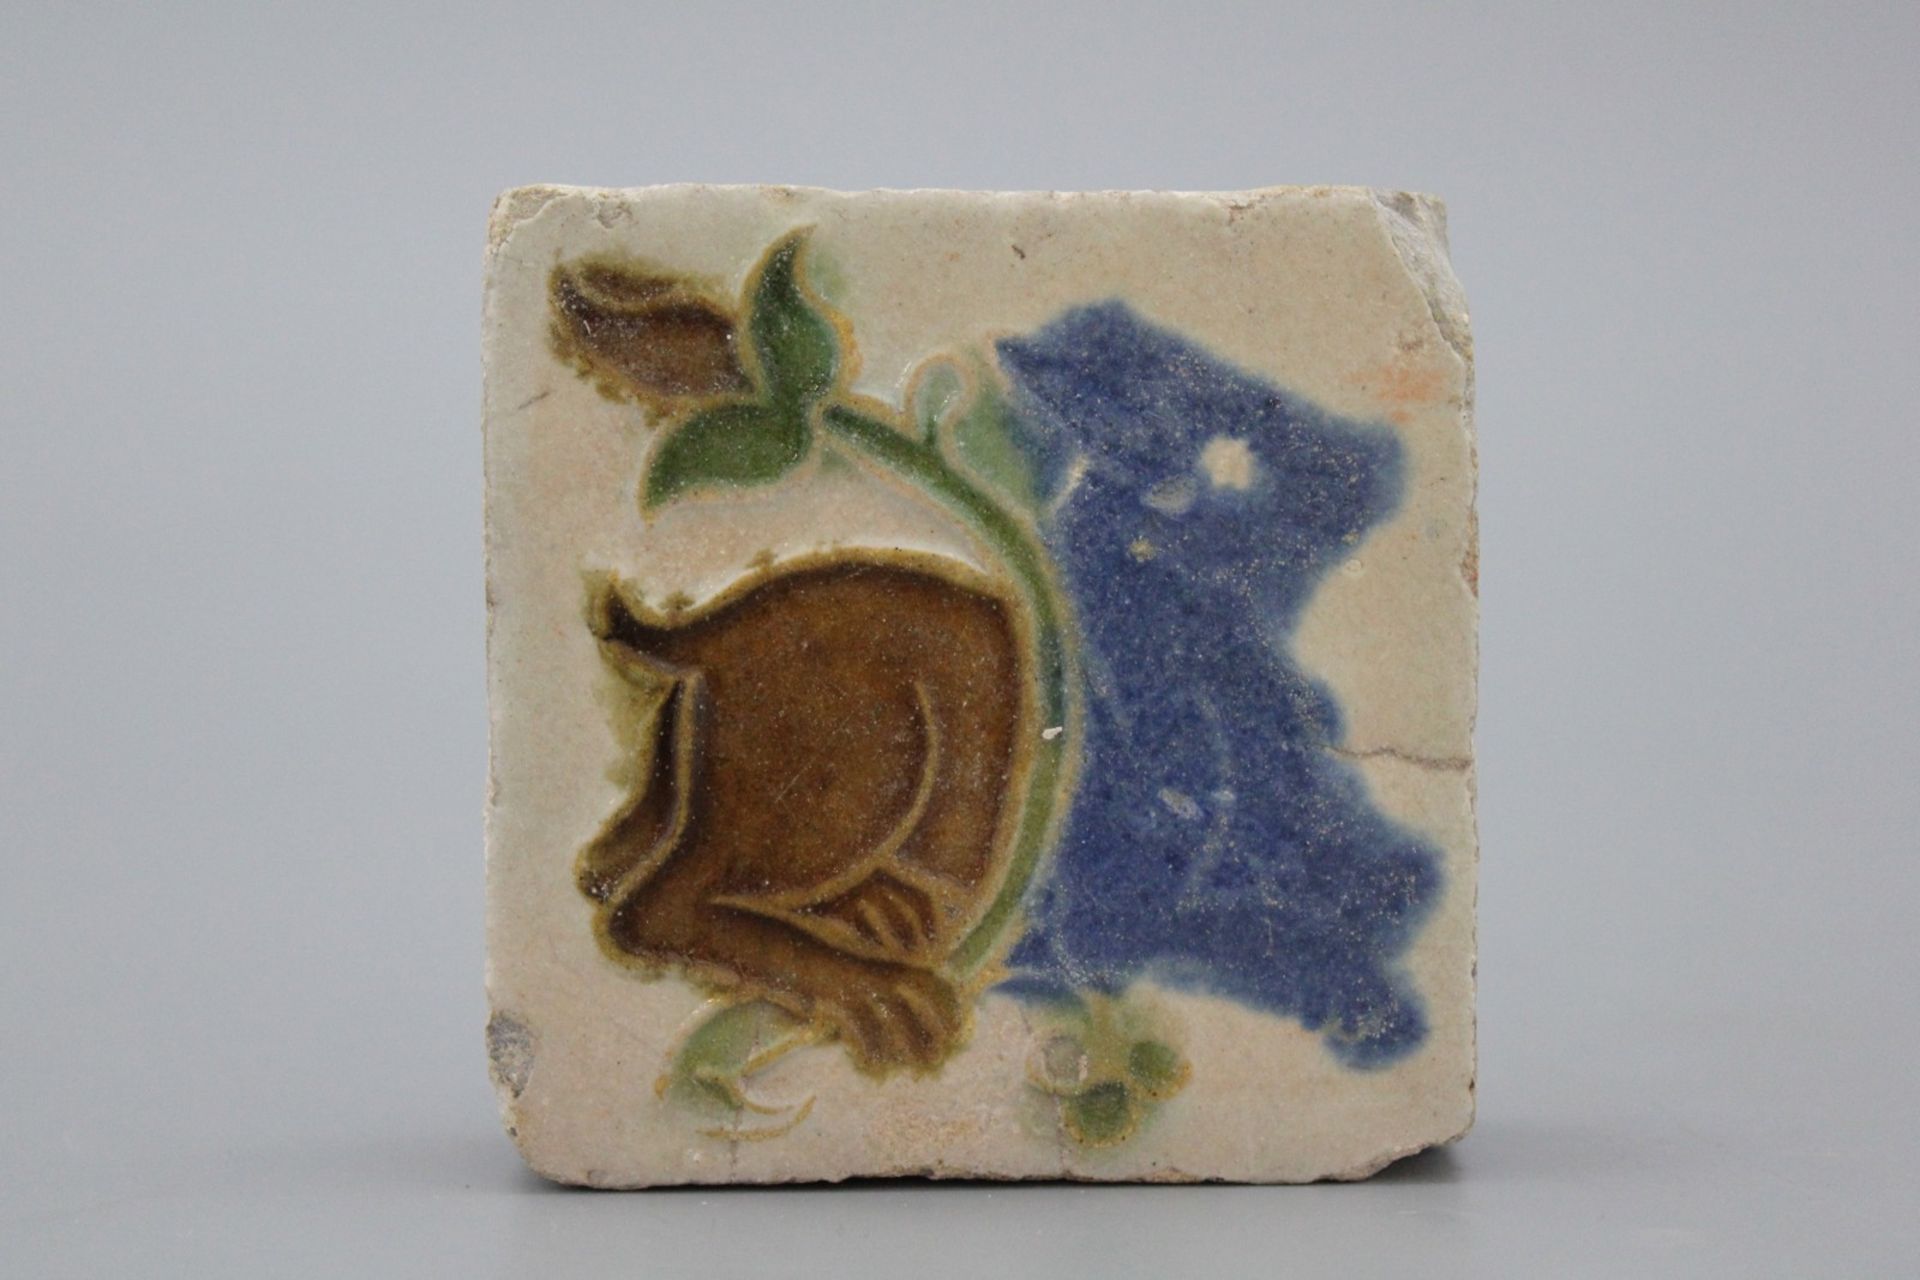 A Spanish olambrilla tile, Seville, first half 16th C. Decorated in relief with a beast and a flower